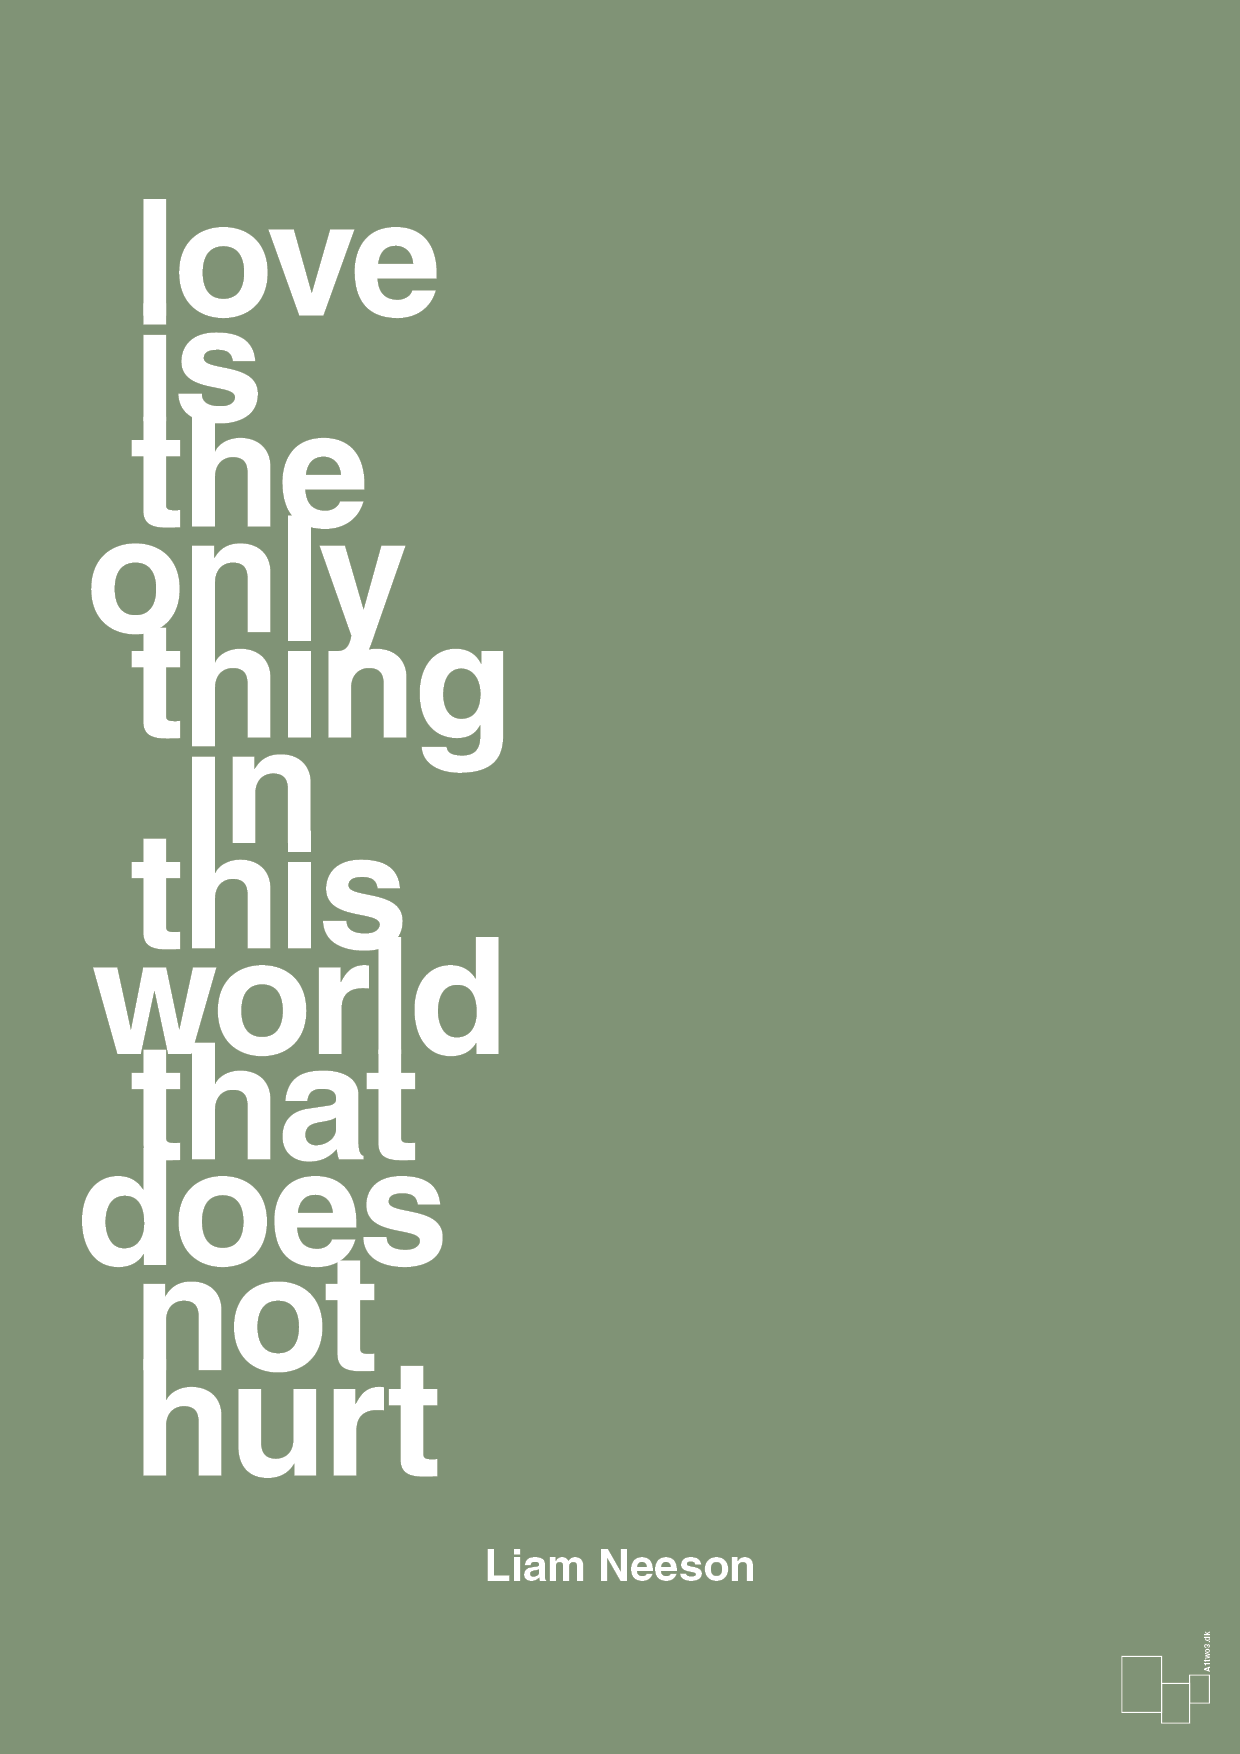 love is the only thing in this world that does not hurt - Plakat med Citater i Jade